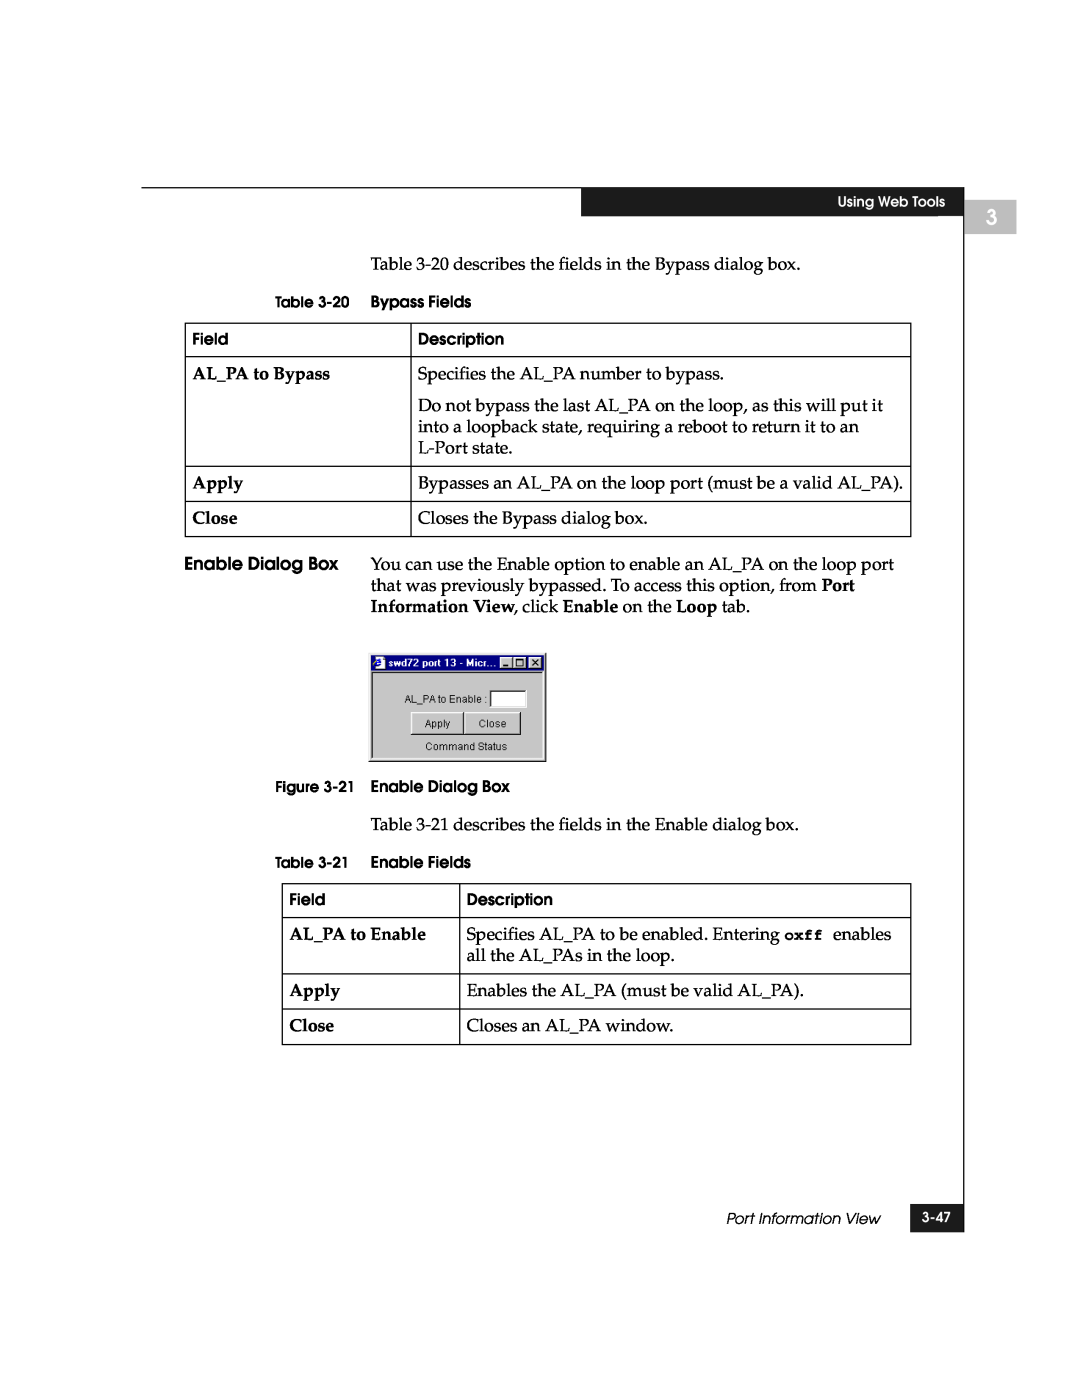 EMC DS-8B manual 20 describes the fields in the Bypass dialog box 